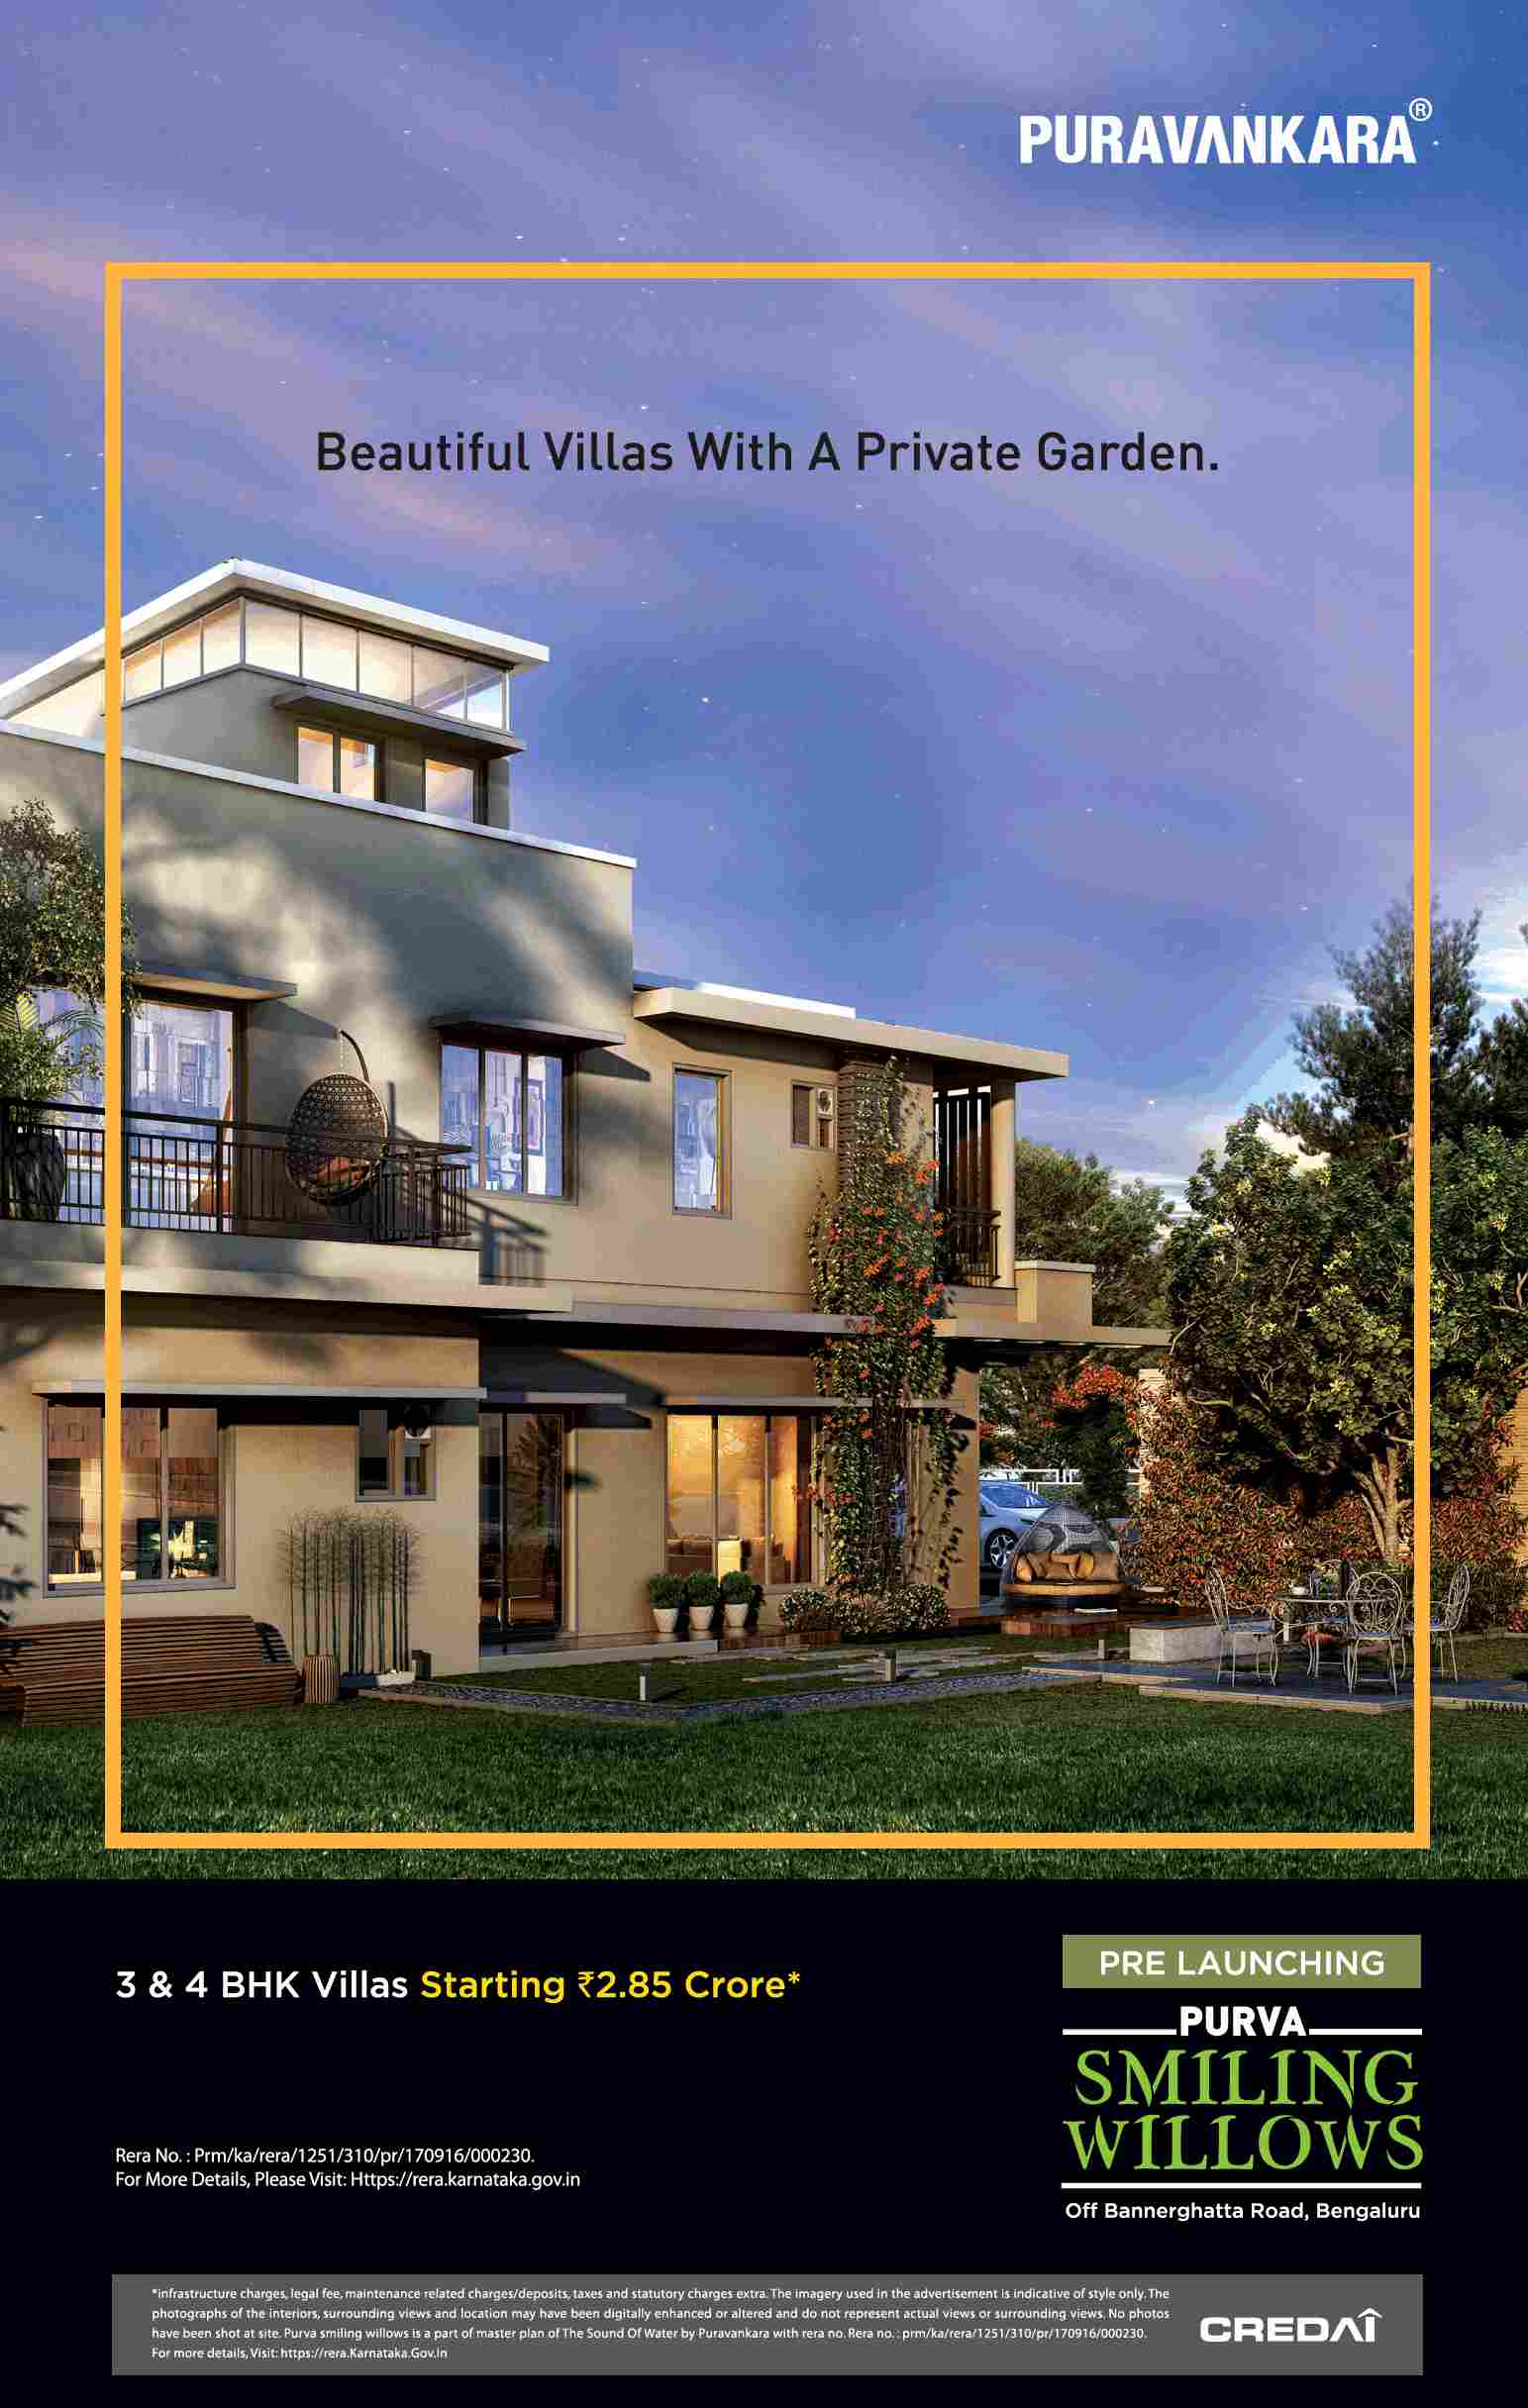 Presenting beautiful villas with private garden @ Rs 2.85 cr at Purva Smiling Willows in Bangalore Update